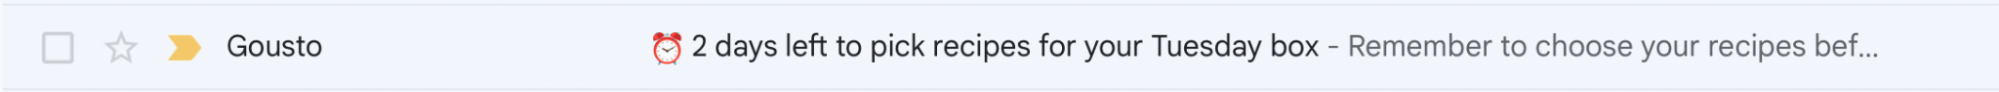 Clock emoji in a food box email subject line.